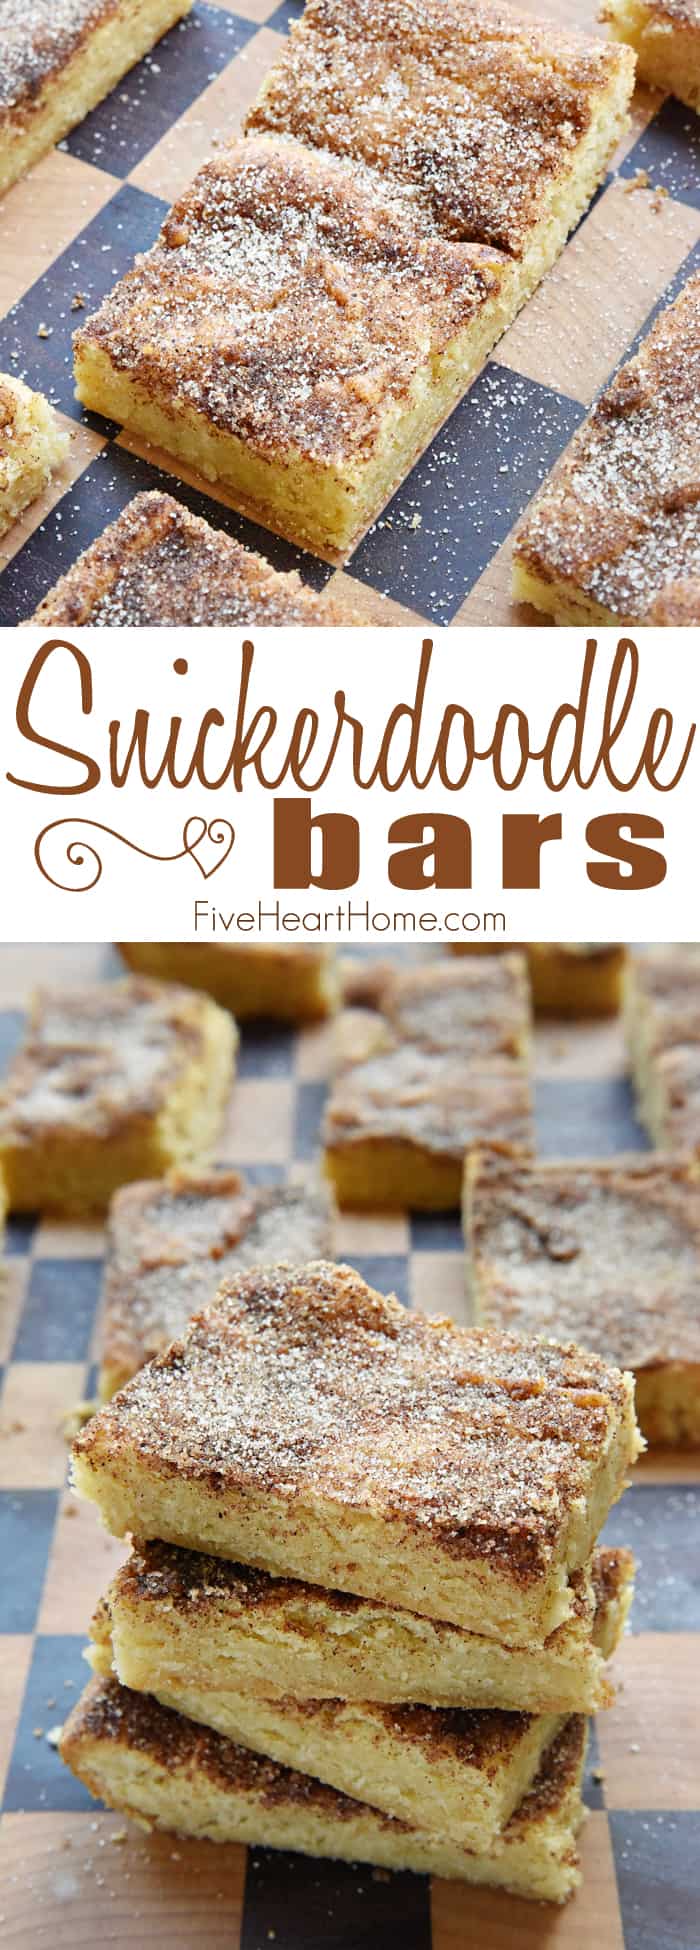 Snickerdoodle Bars ~ soft and chewy treats that are as effortless as spreading batter into a pan and showering with cinnamon and sugar...half the work of the popular cookies with the same yummy flavor and texture! | FiveHeartHome.com via @fivehearthome